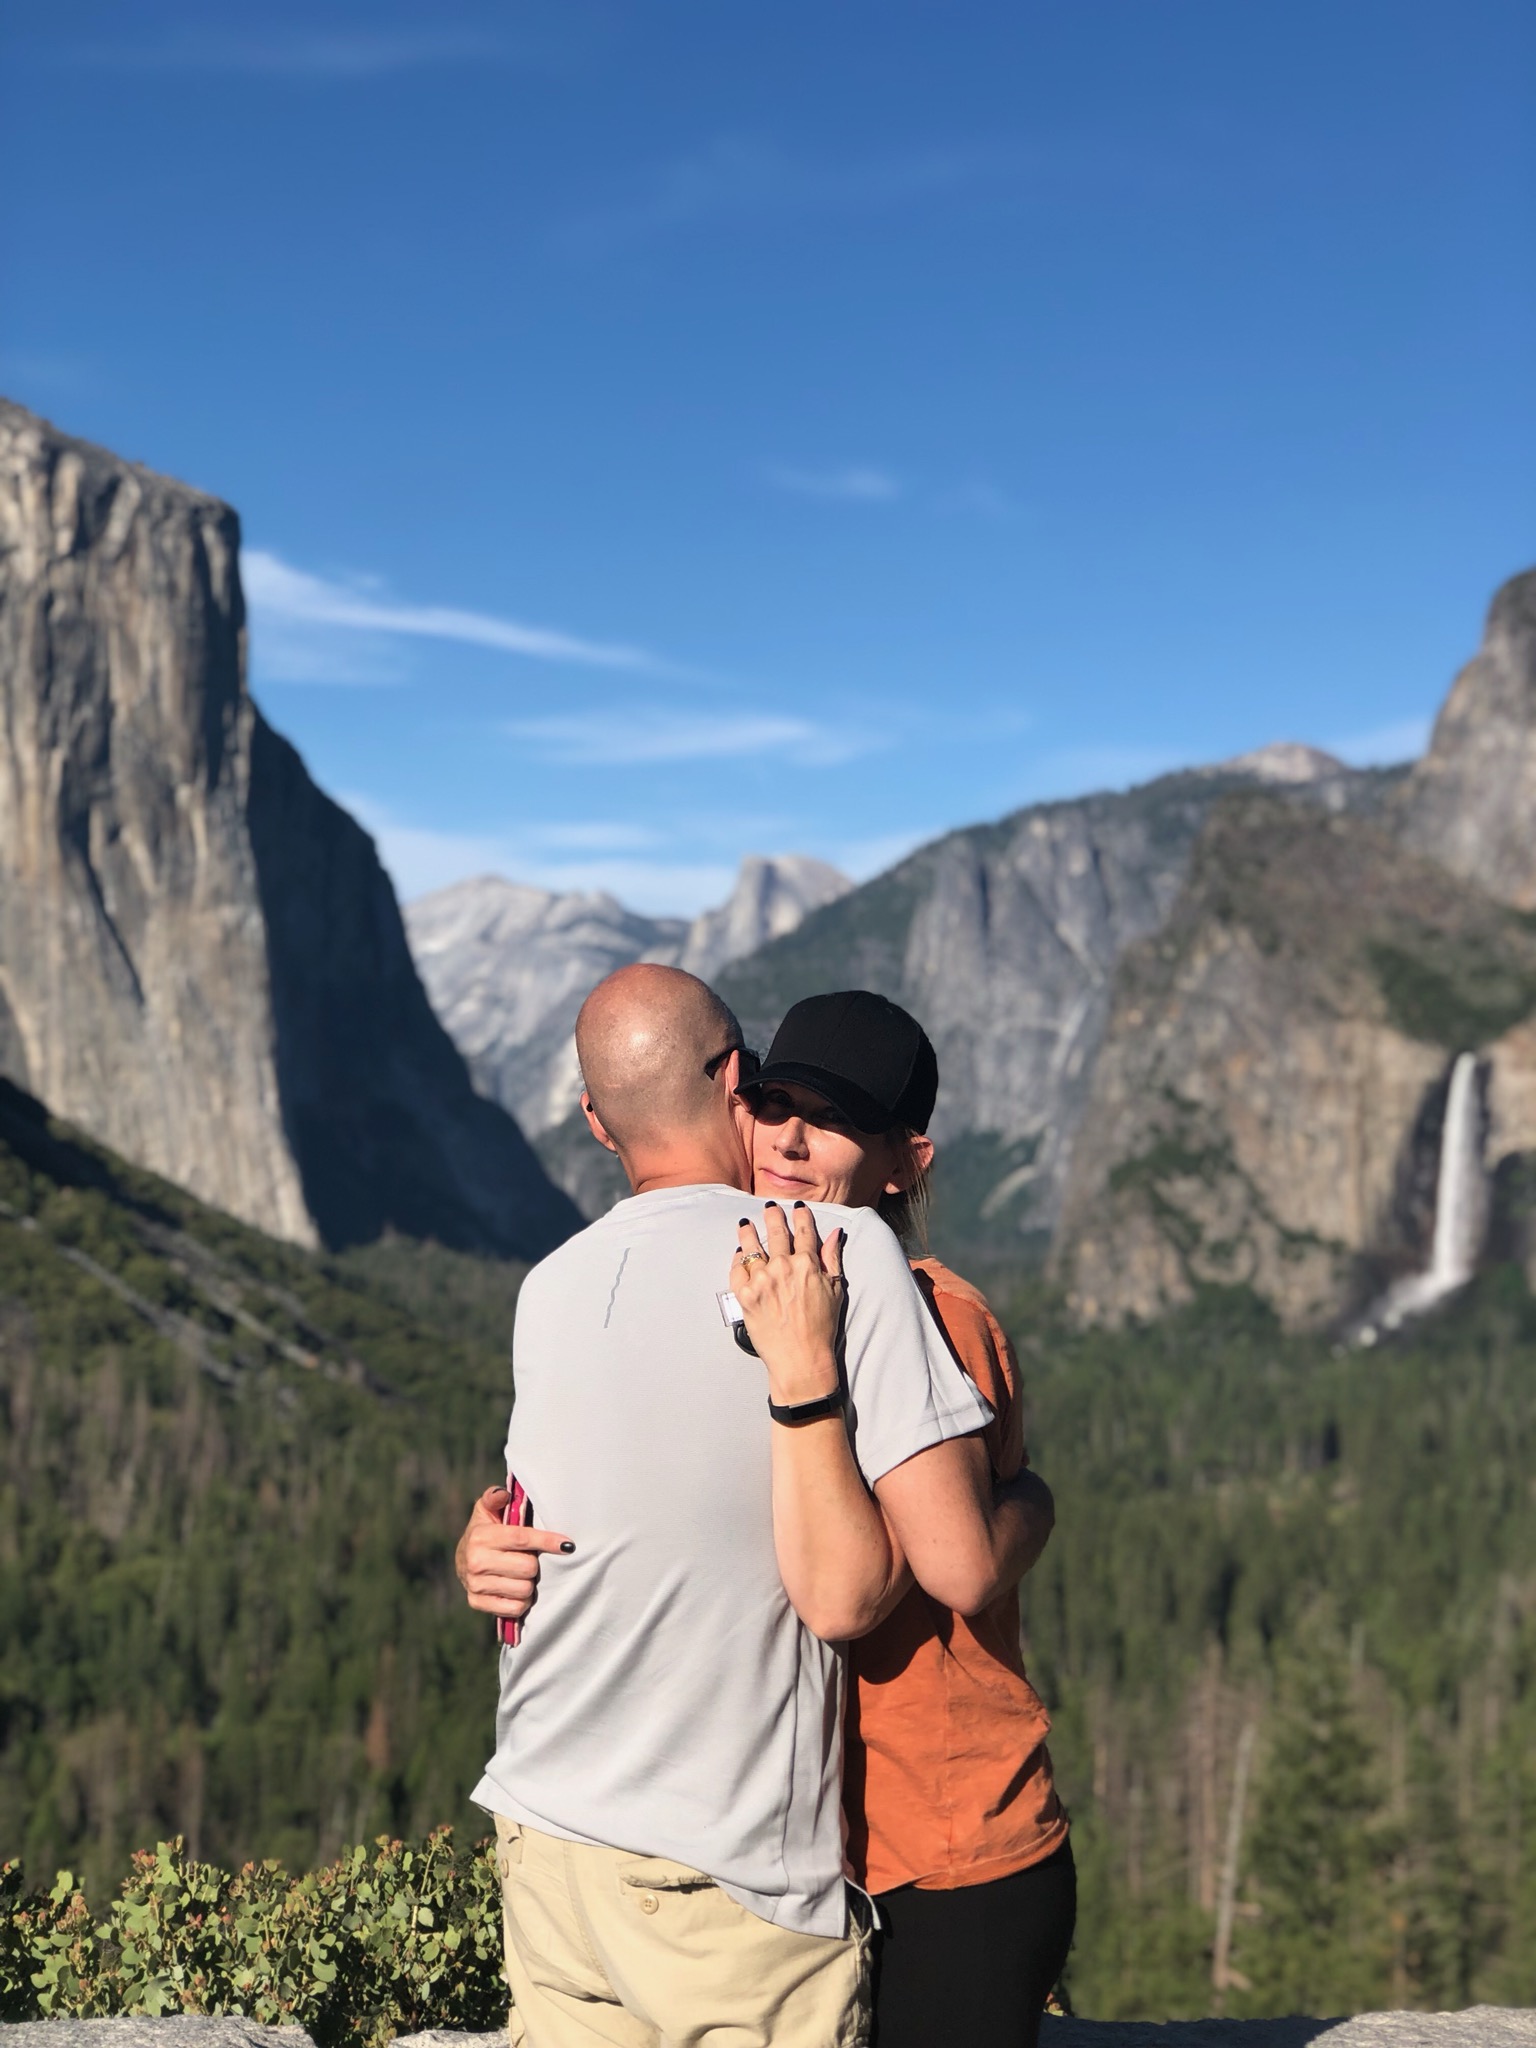 Visiting Yosemite National Park – and being robbed within 20 minutes of arrival to California. Good Times.